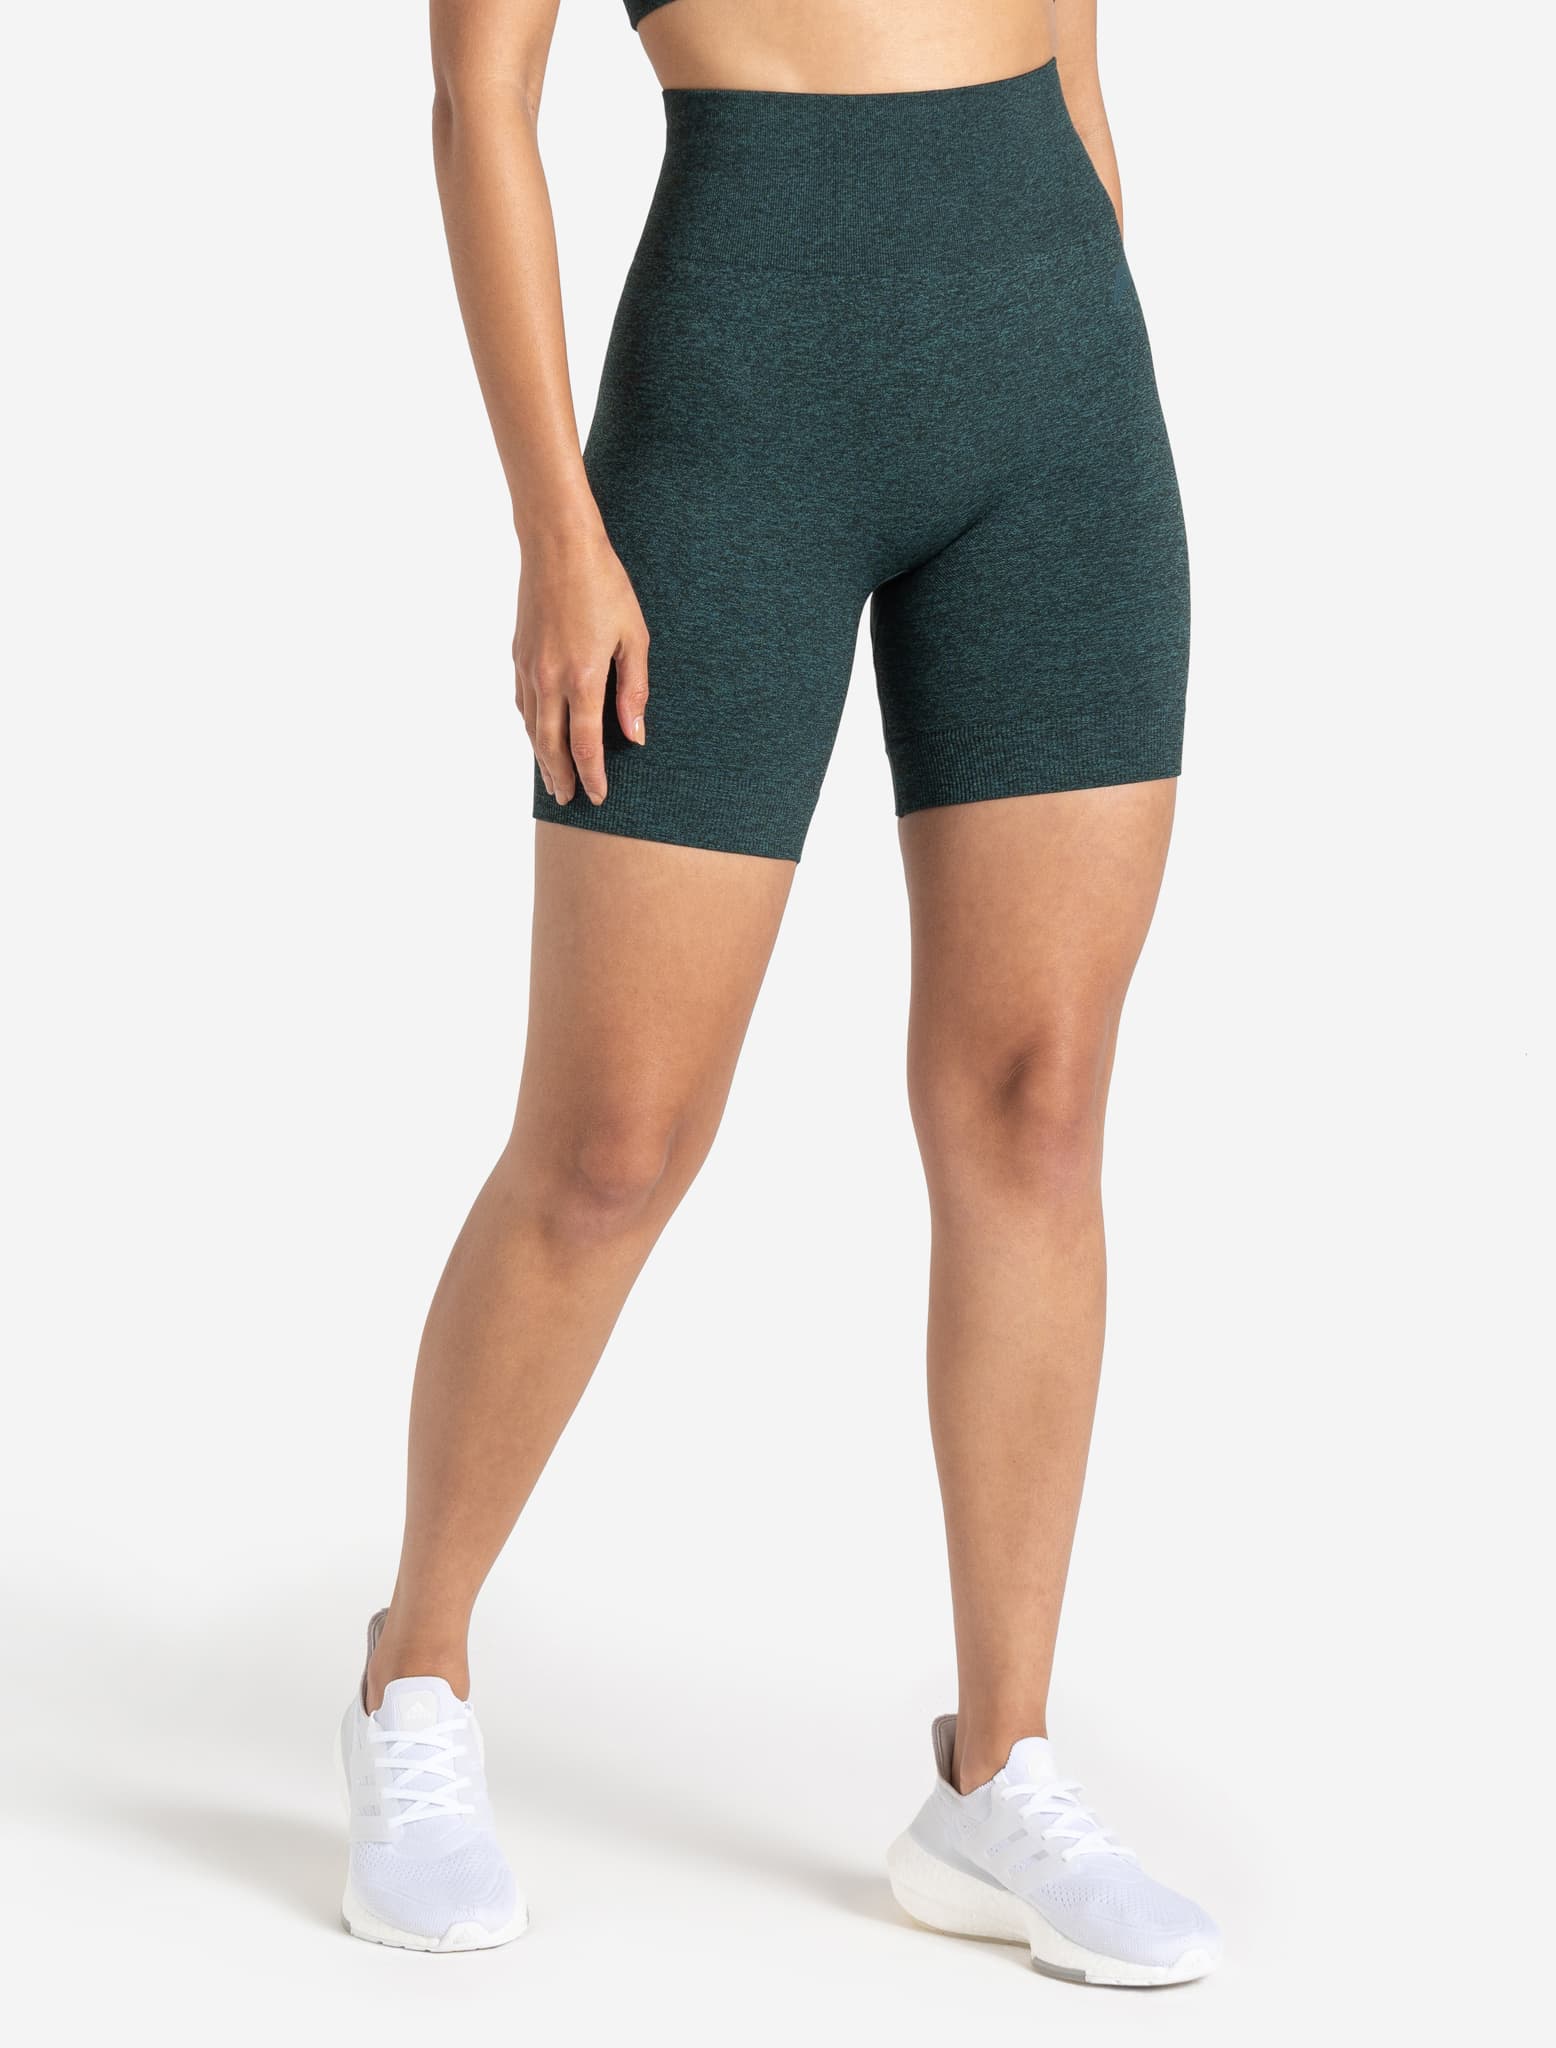 Core Seamless Shorts / Teal Marl Pursue Fitness 1